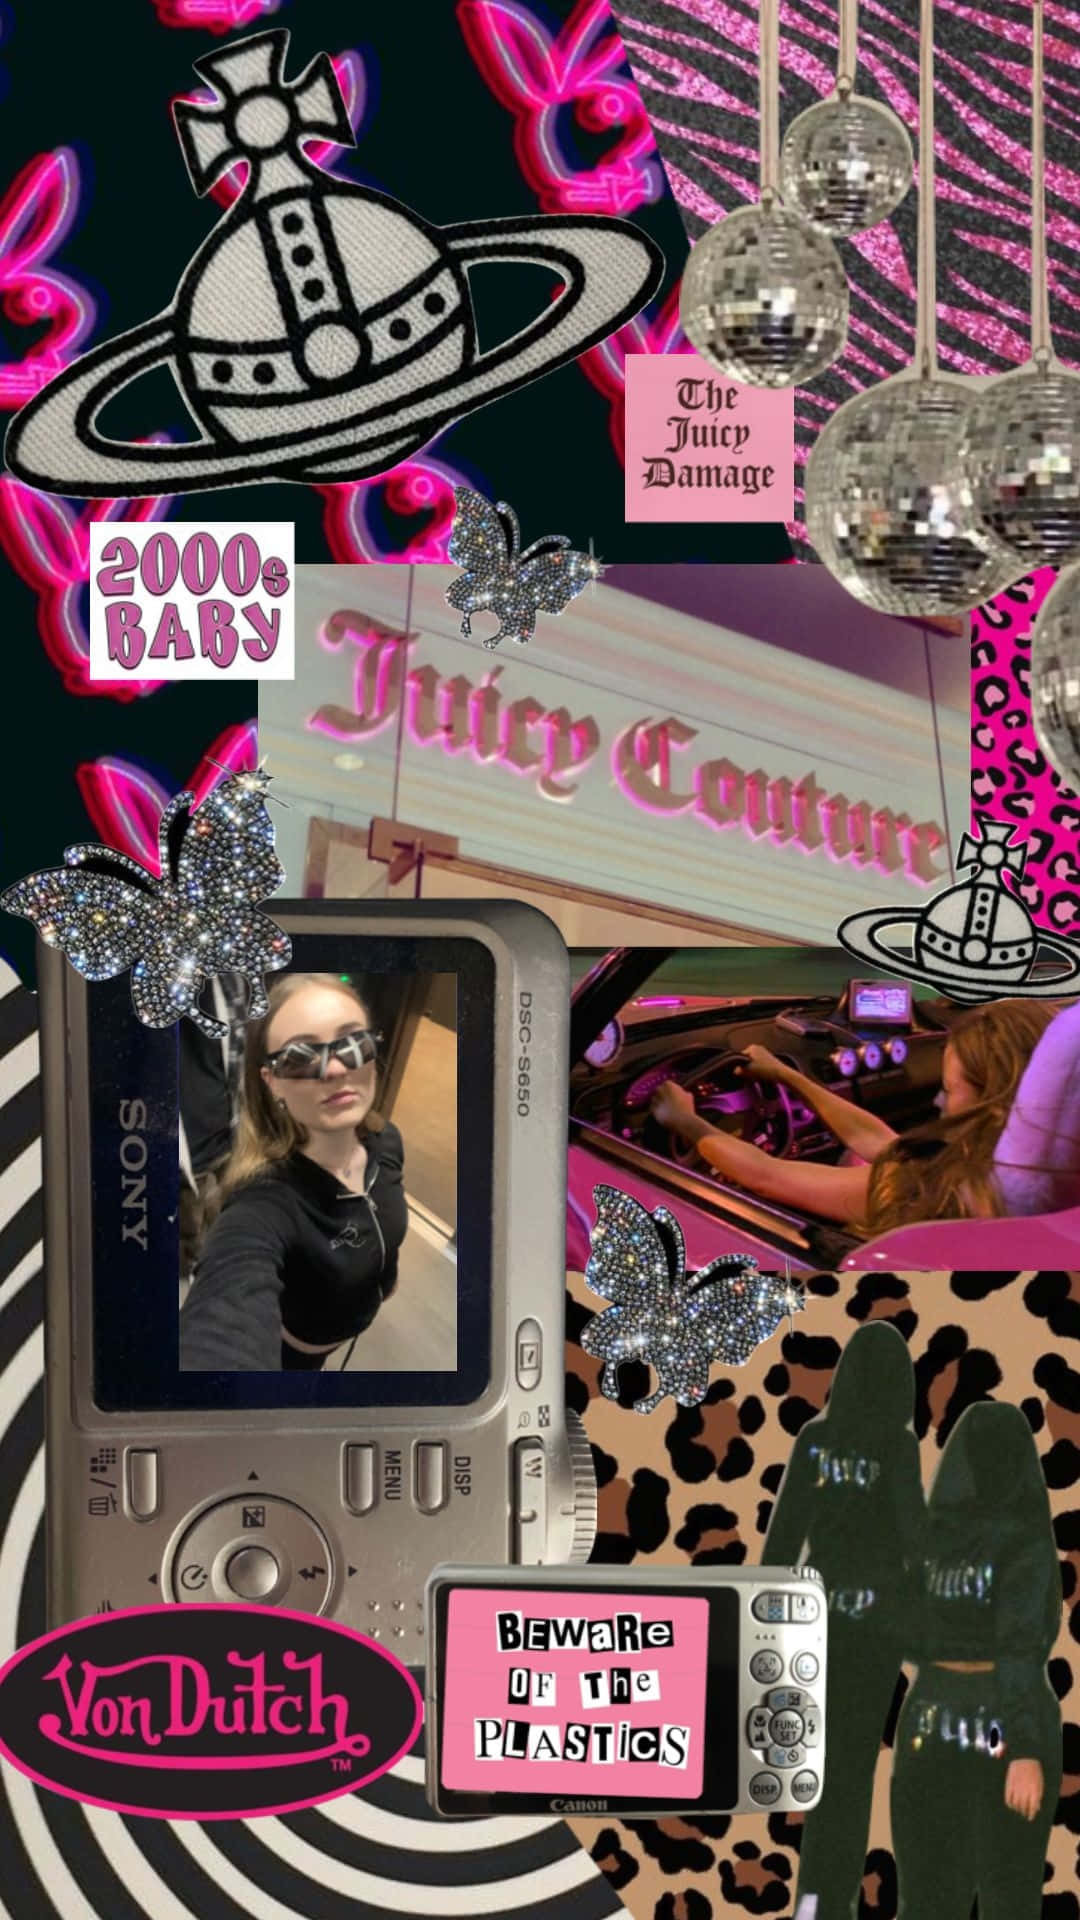 Early2000s Aesthetic Collage.jpg Wallpaper